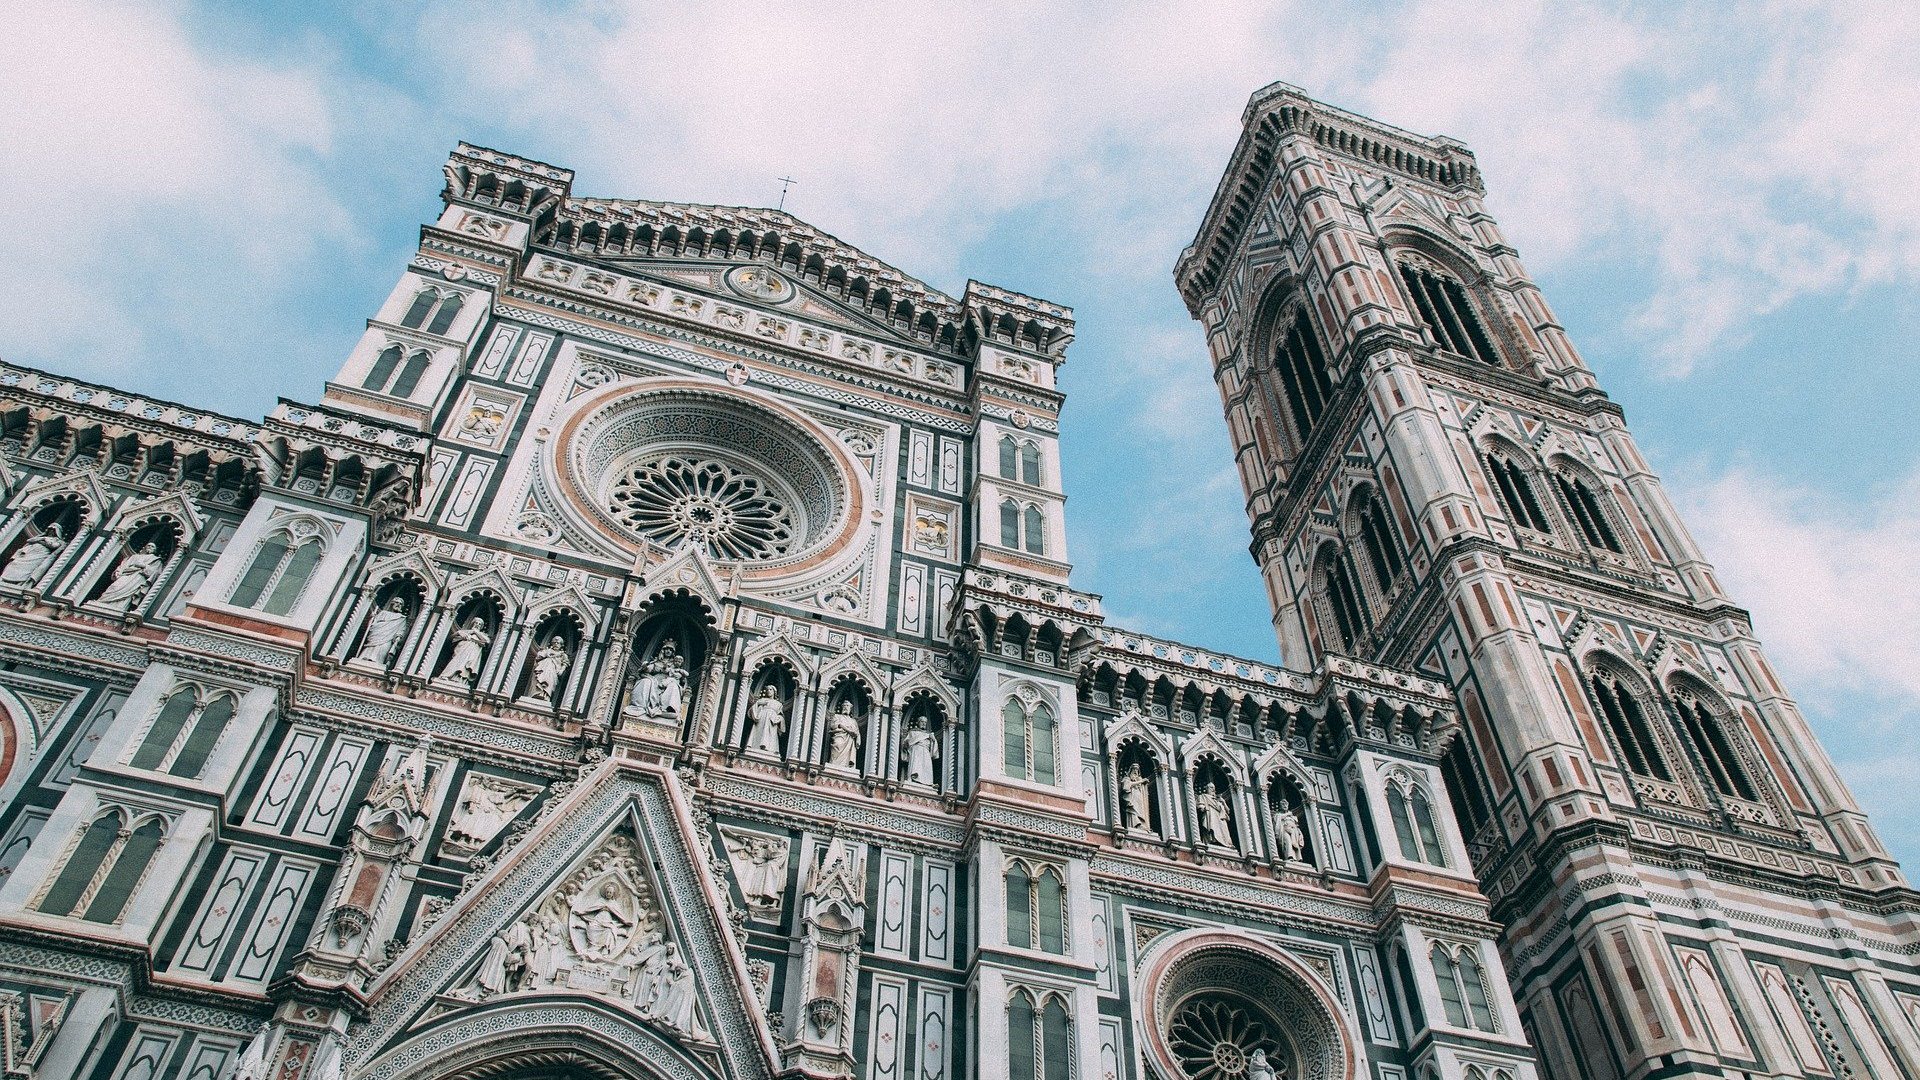 Florence guided tour The Cathedral of Santa Maria del Fiore has been completed in the 15th century